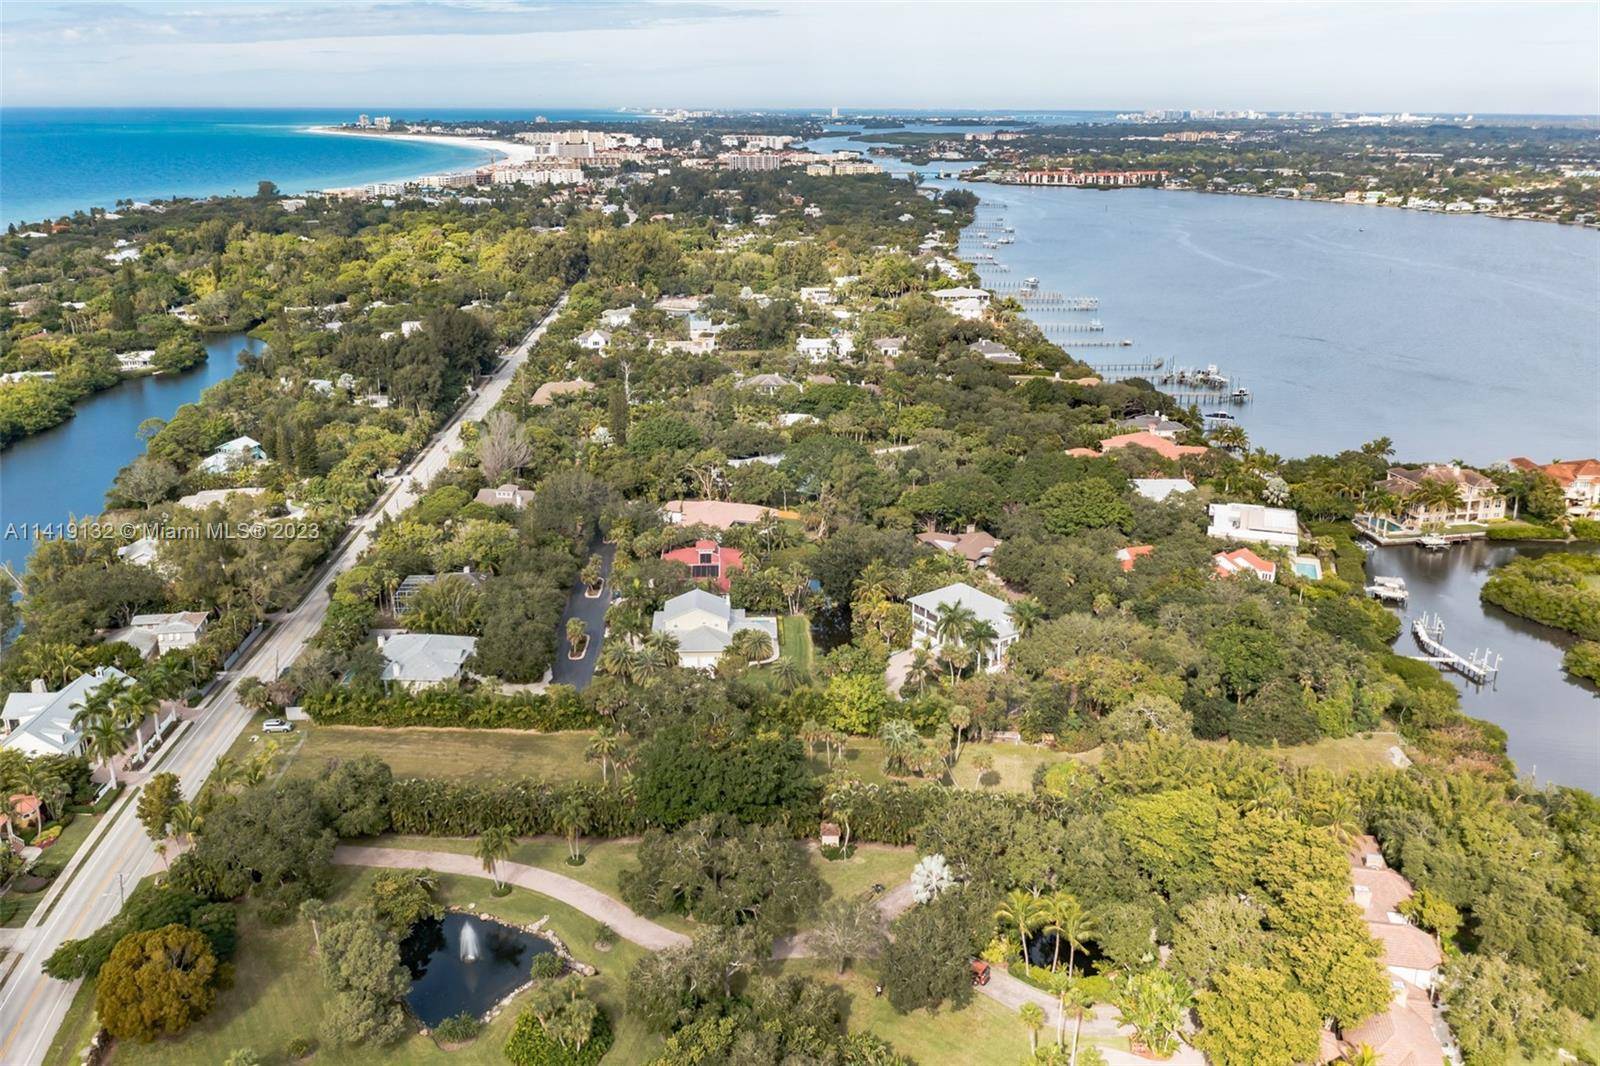 Two acre Lot on Little Sarasota Bay with exceptional privacy, views, boating access and development potential.